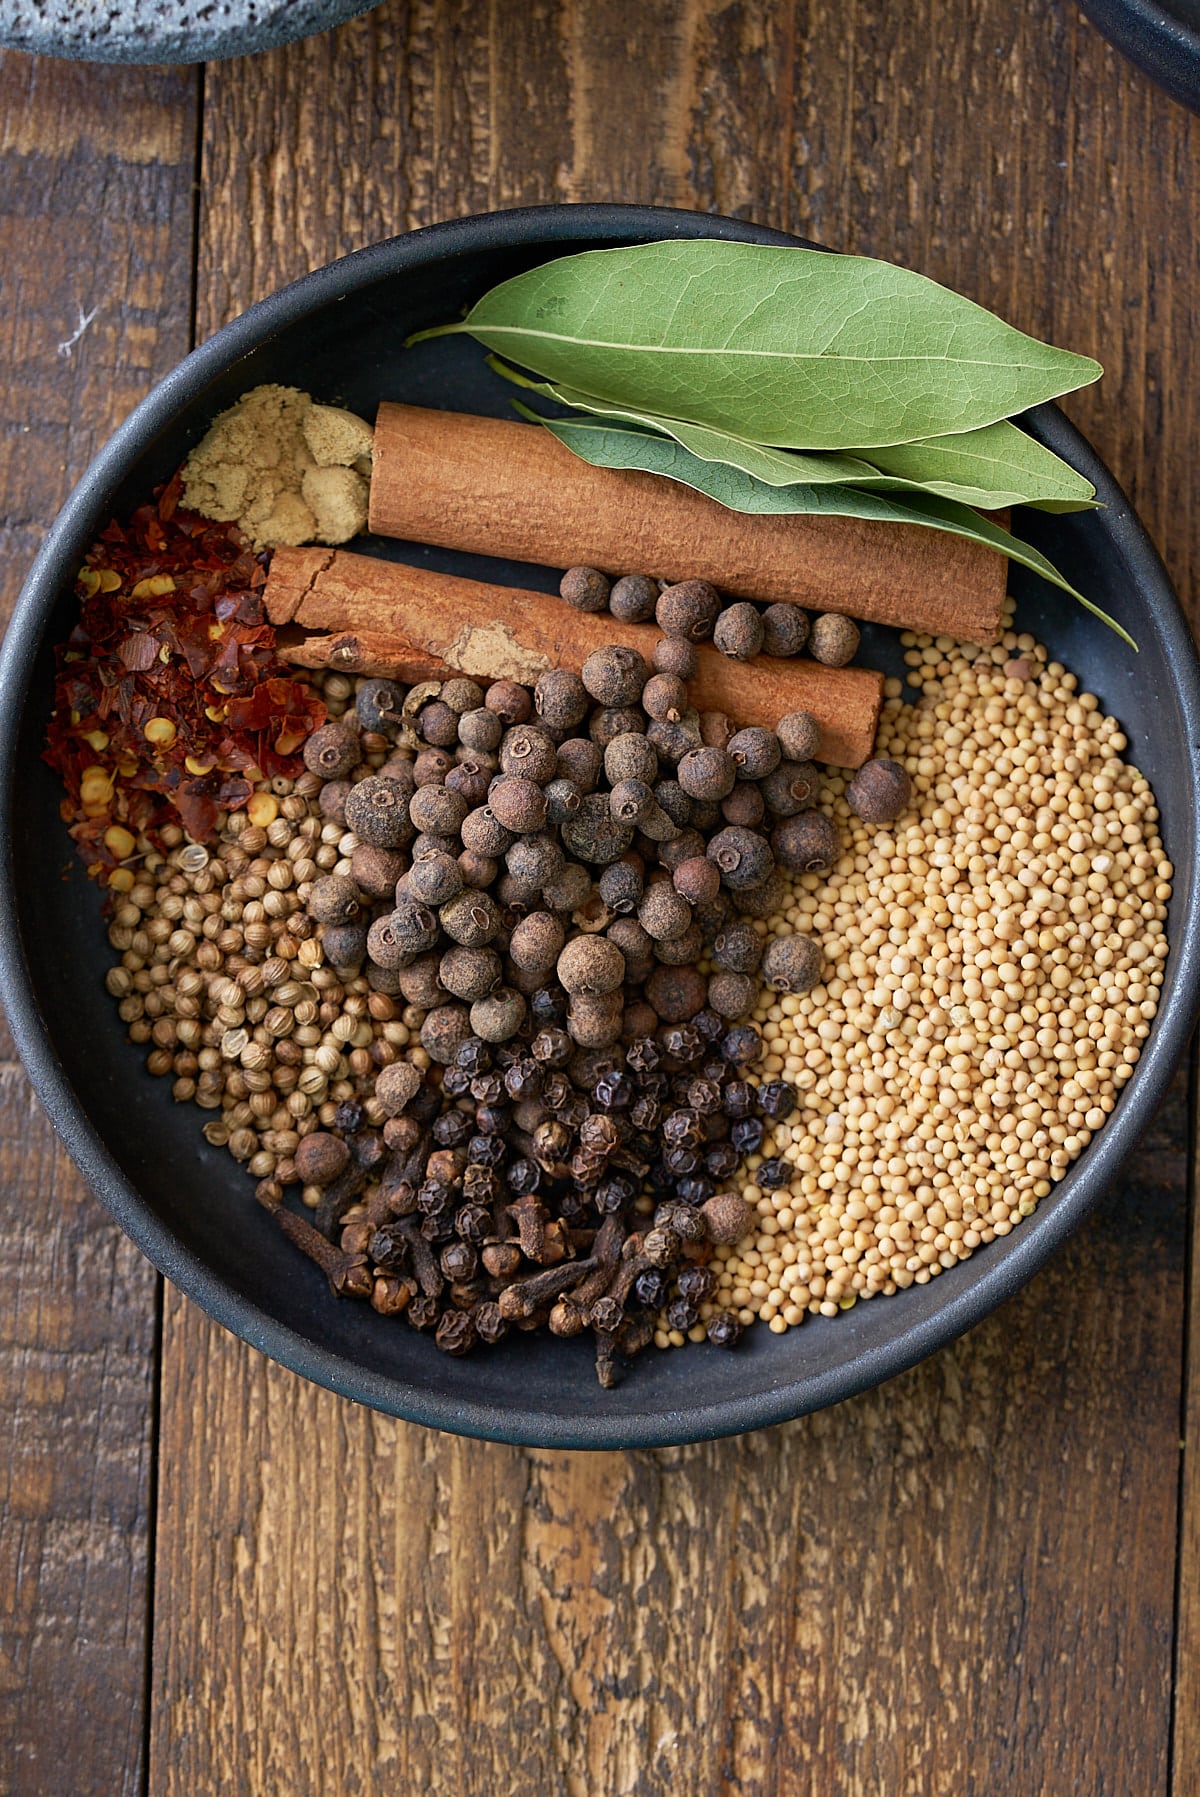 A black bowl filled with pickling spice recipe ingredients, including red pepper flakes, allspice berries, mustard seeds, black peppercorns, cinnamon sticks, bay leaves and coriander seeds.